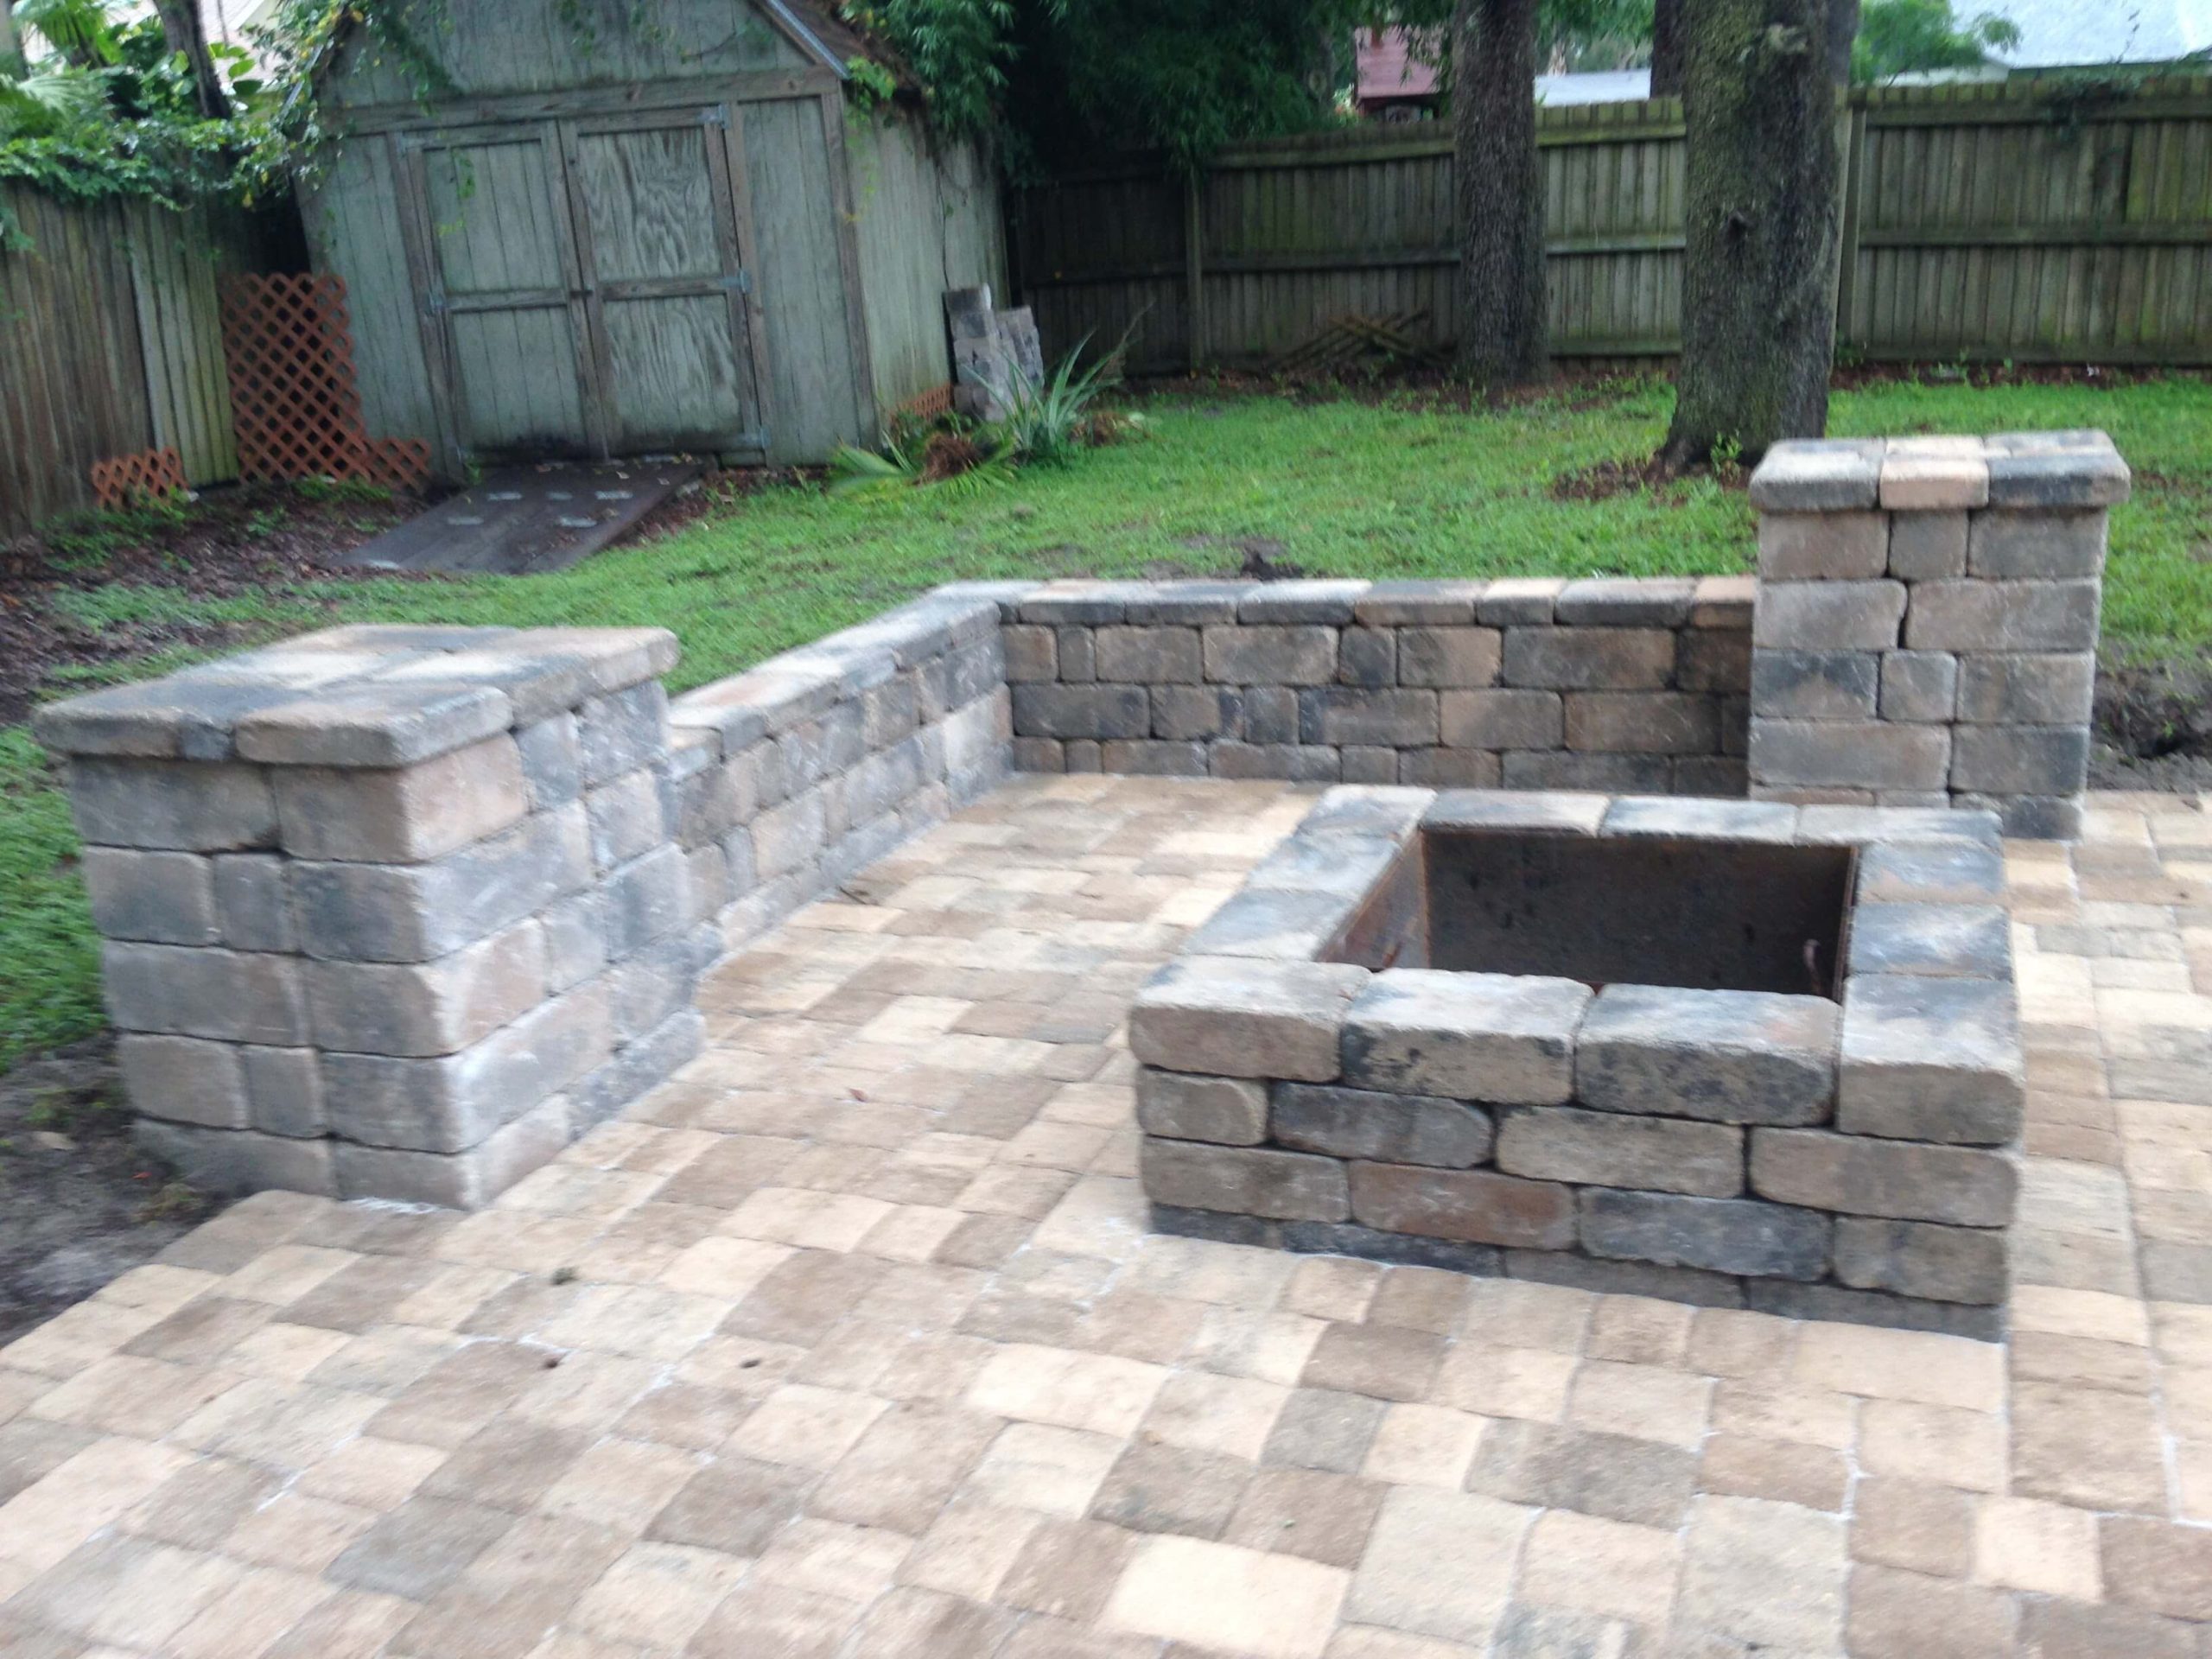 Fire Pits Bay Brick Pavers - How To Build A Fire Pit On Patio Pavers